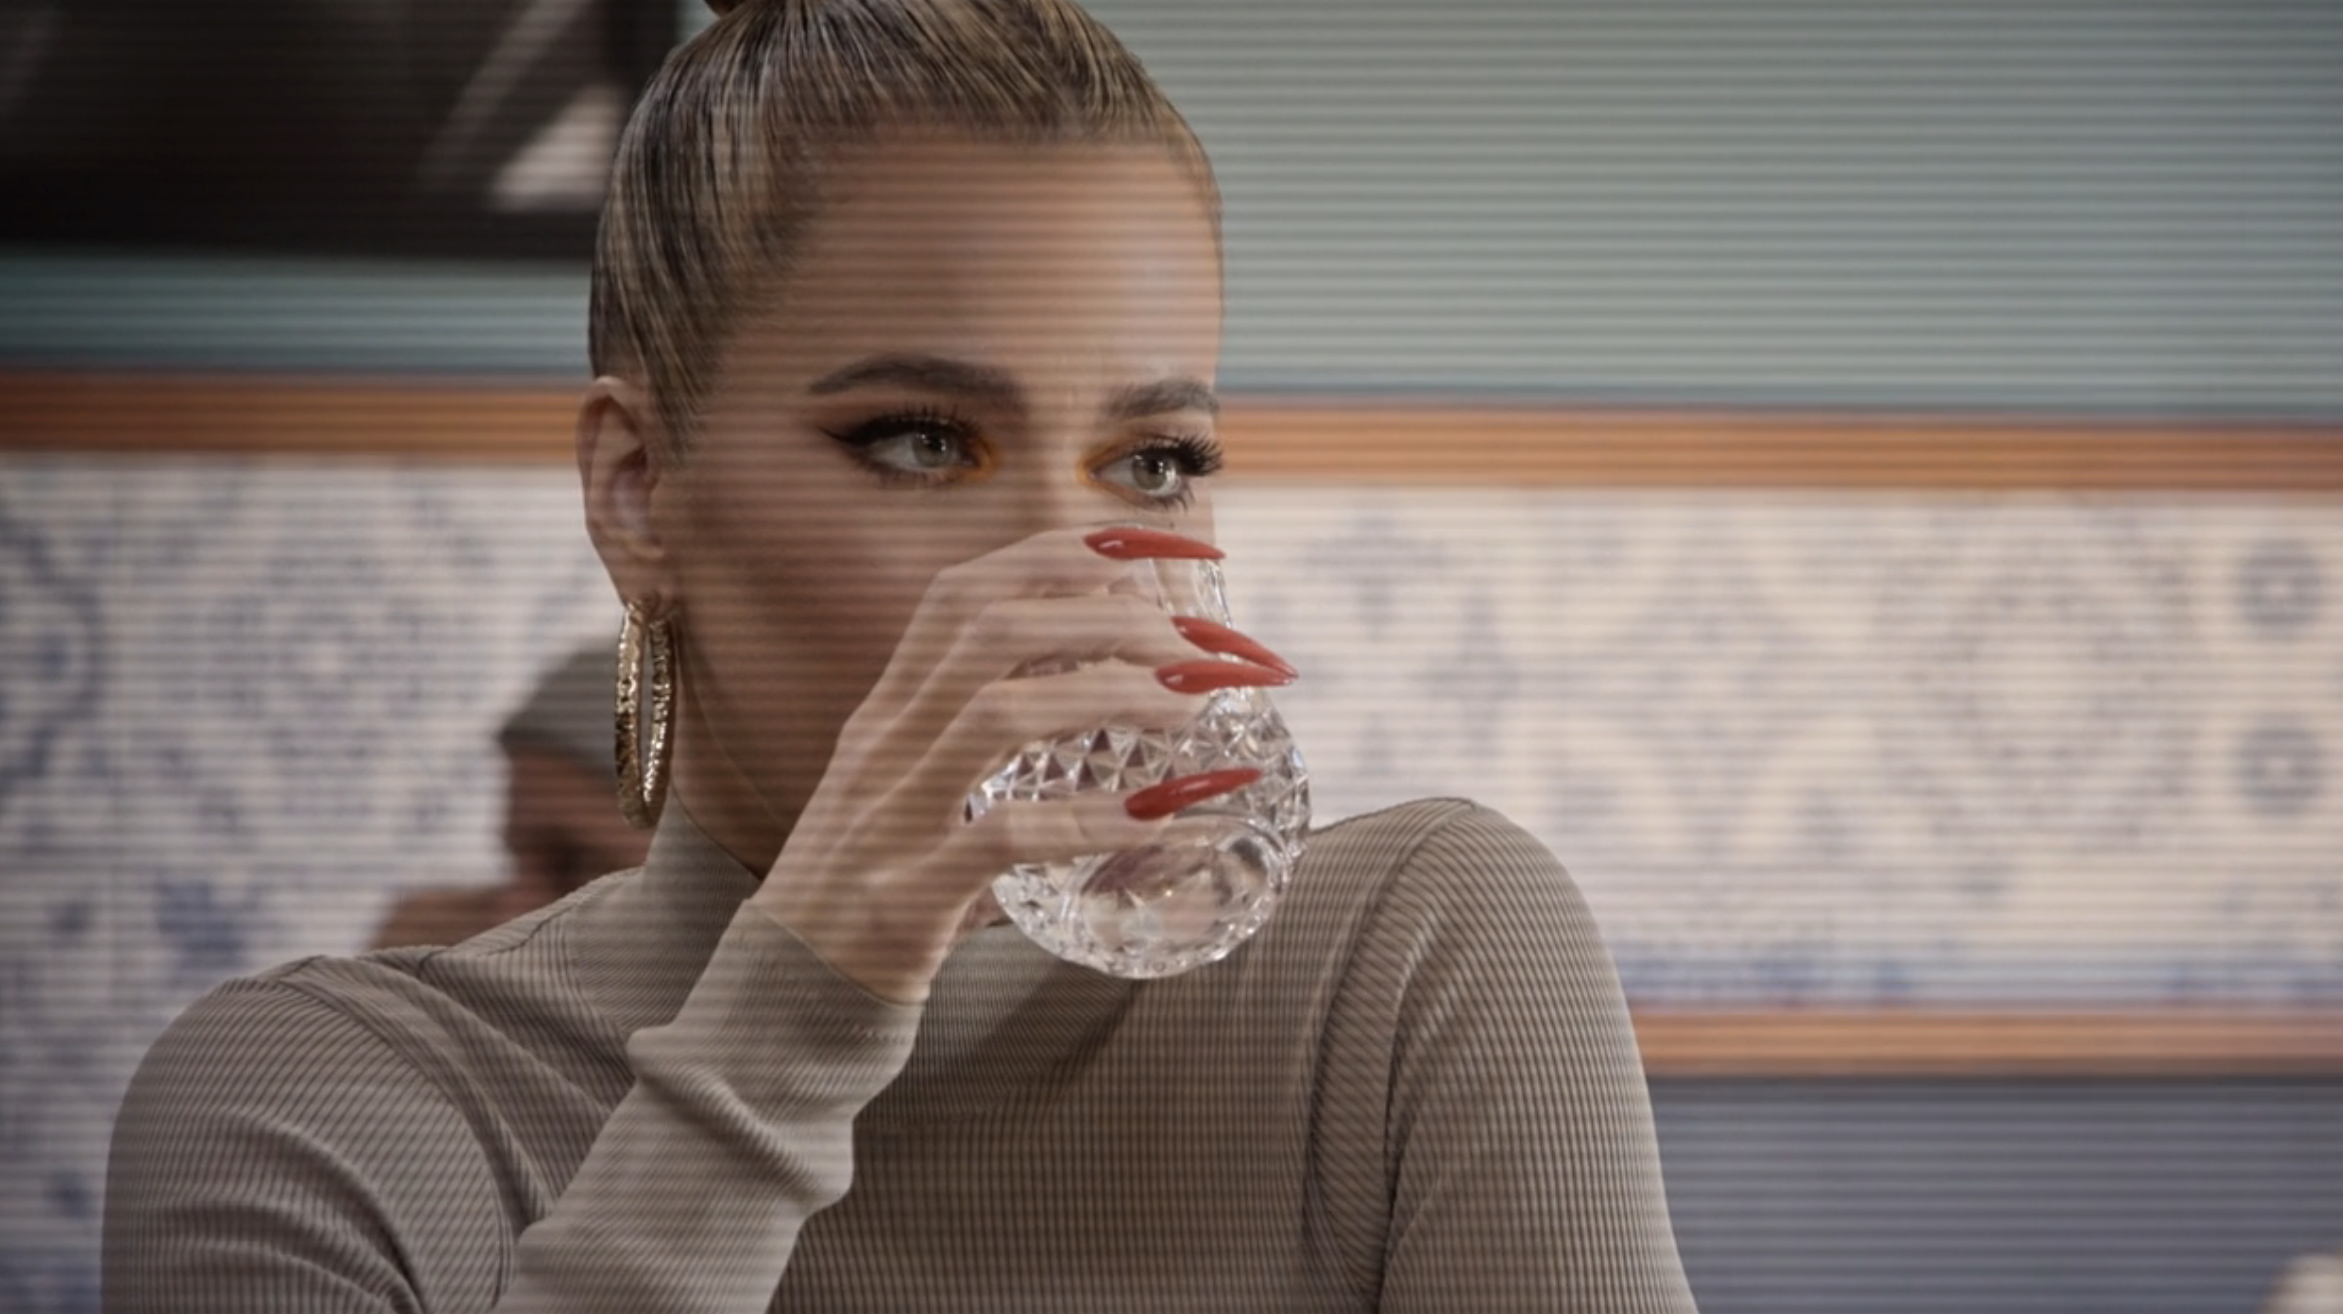 A closeup of Khloé holding a glass up to her mouth